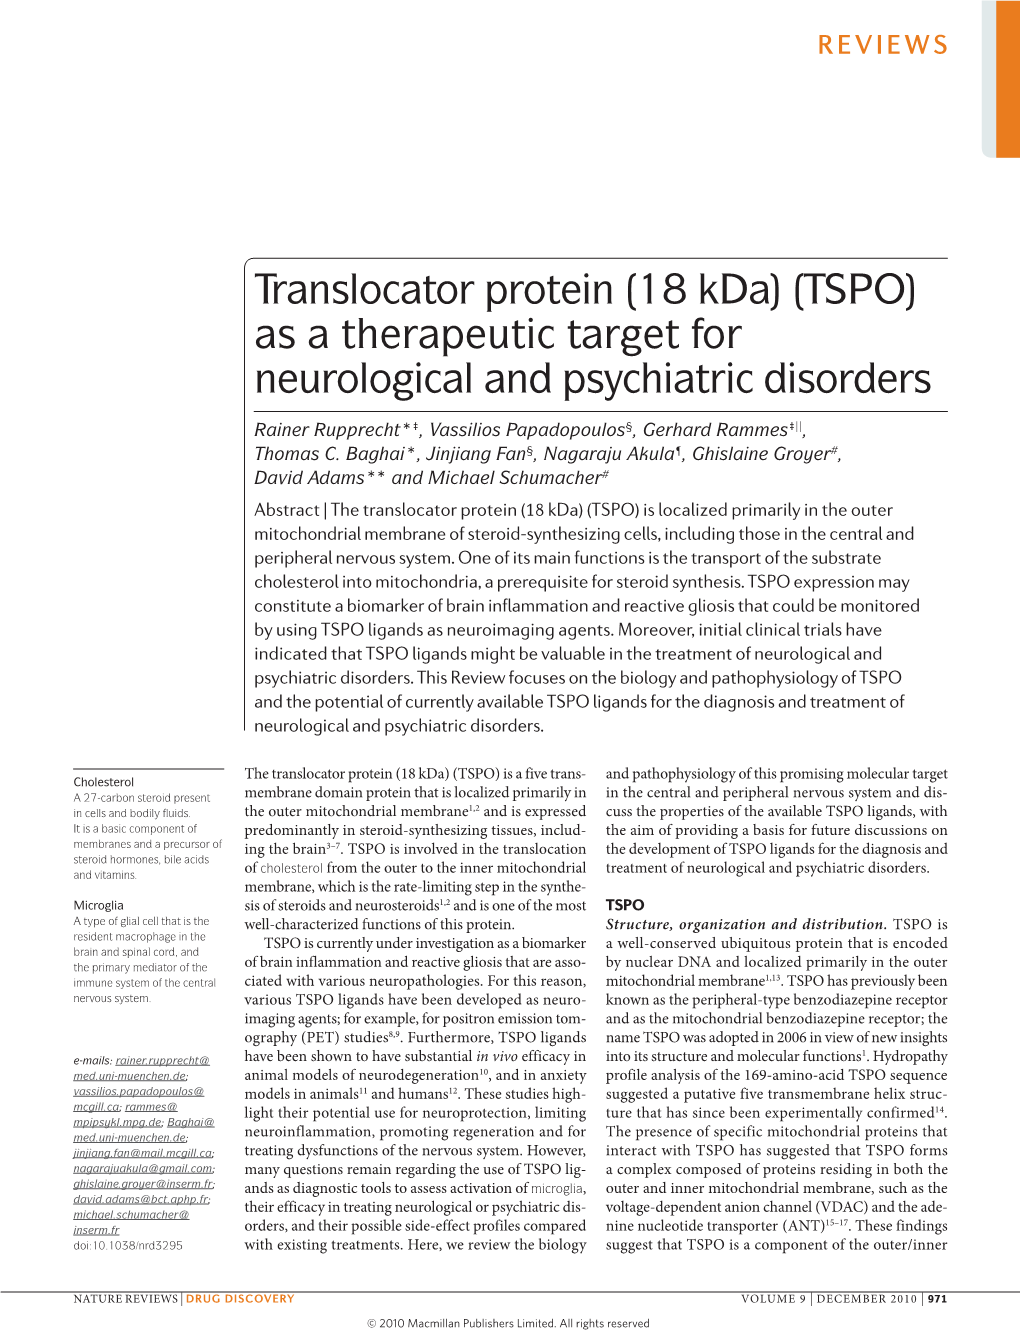 (18 Kda) (TSPO) As a Therapeutic Target for Neurological and Psychiatric Disorders